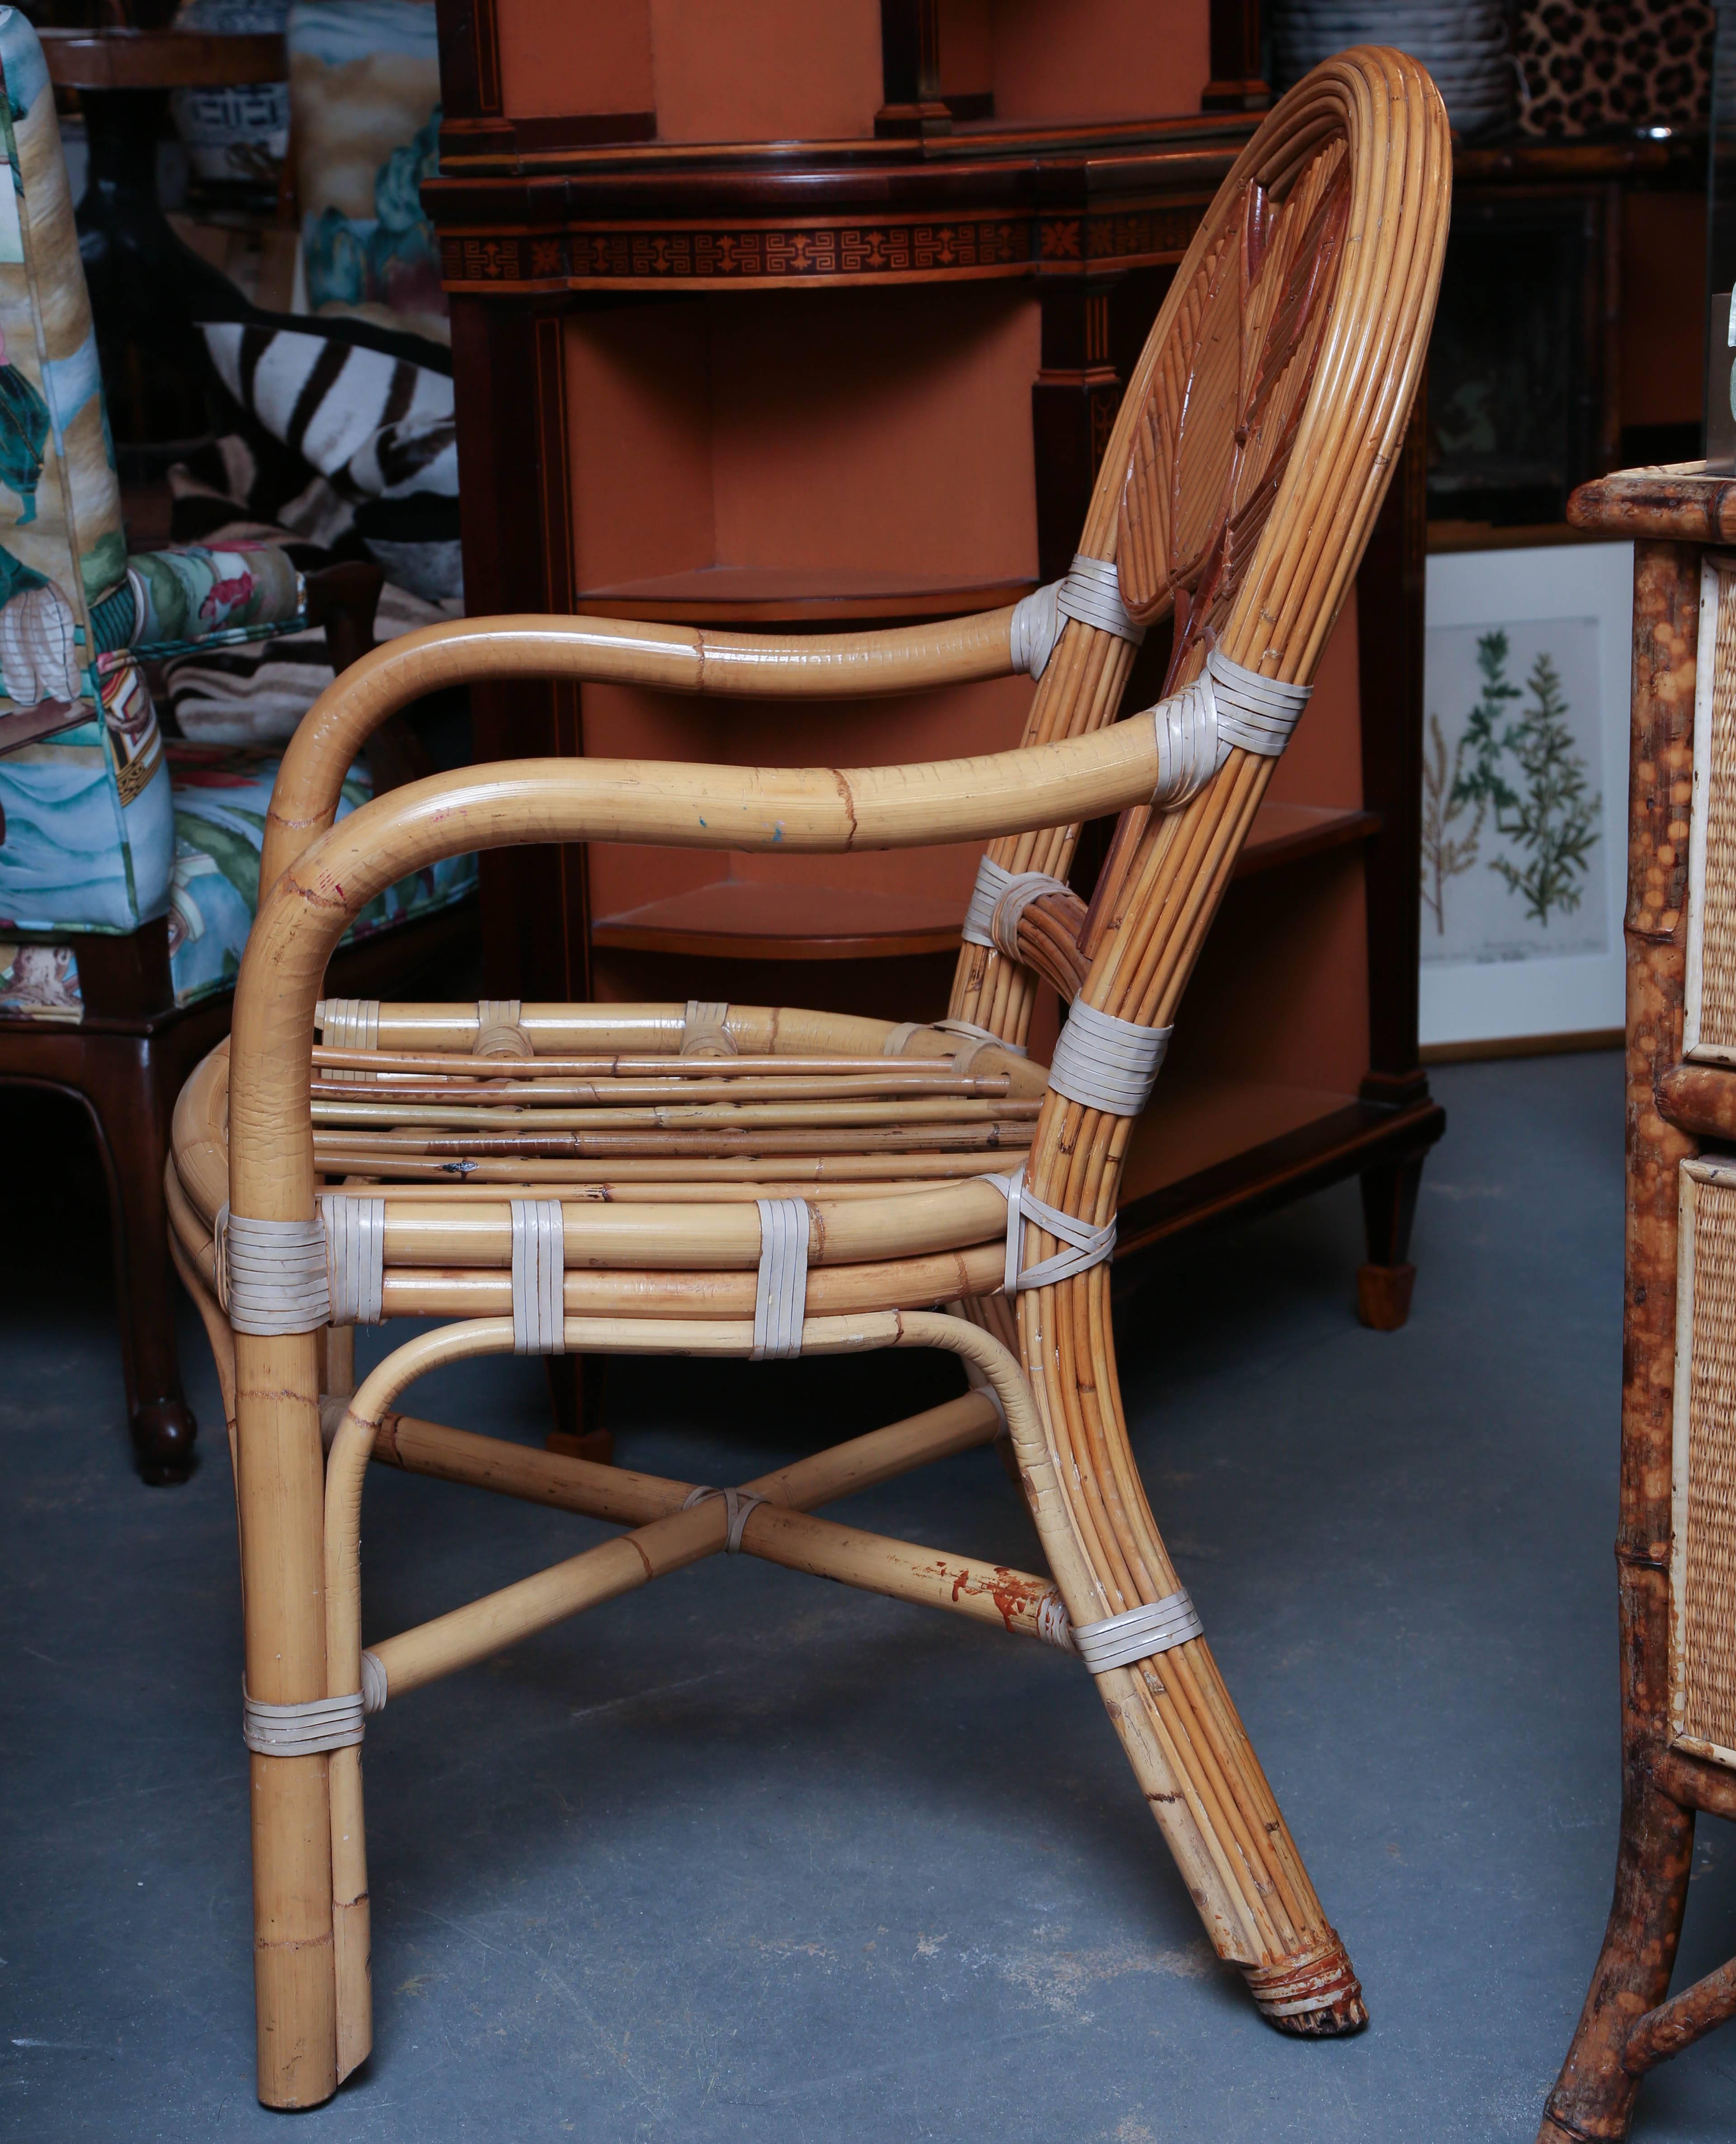 Superb palm frond motif back rests.
A splendid tropical themed set with two armchairs.